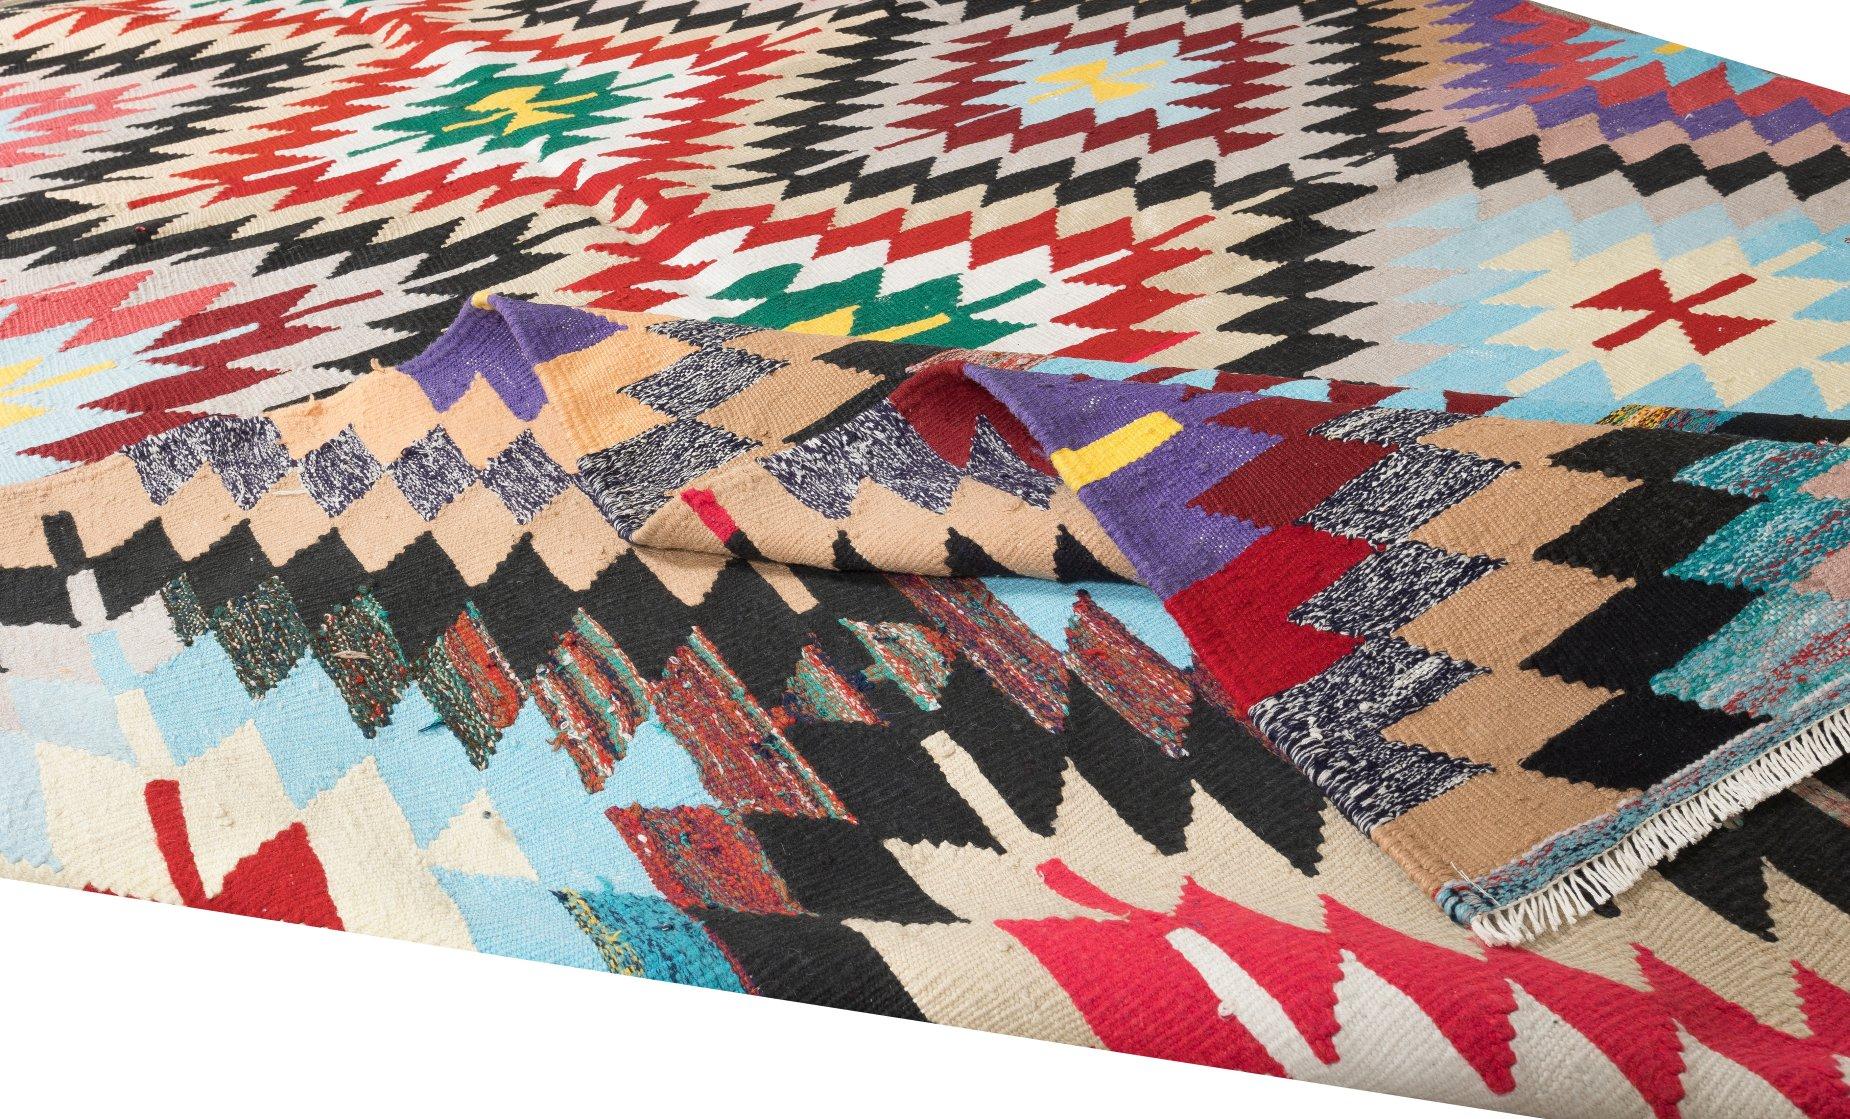 Hand-Woven 6.2x9.8 Ft Dazzling Handmade Turkish Wool Kilim, One of a Kind Flat-Weave Rug For Sale